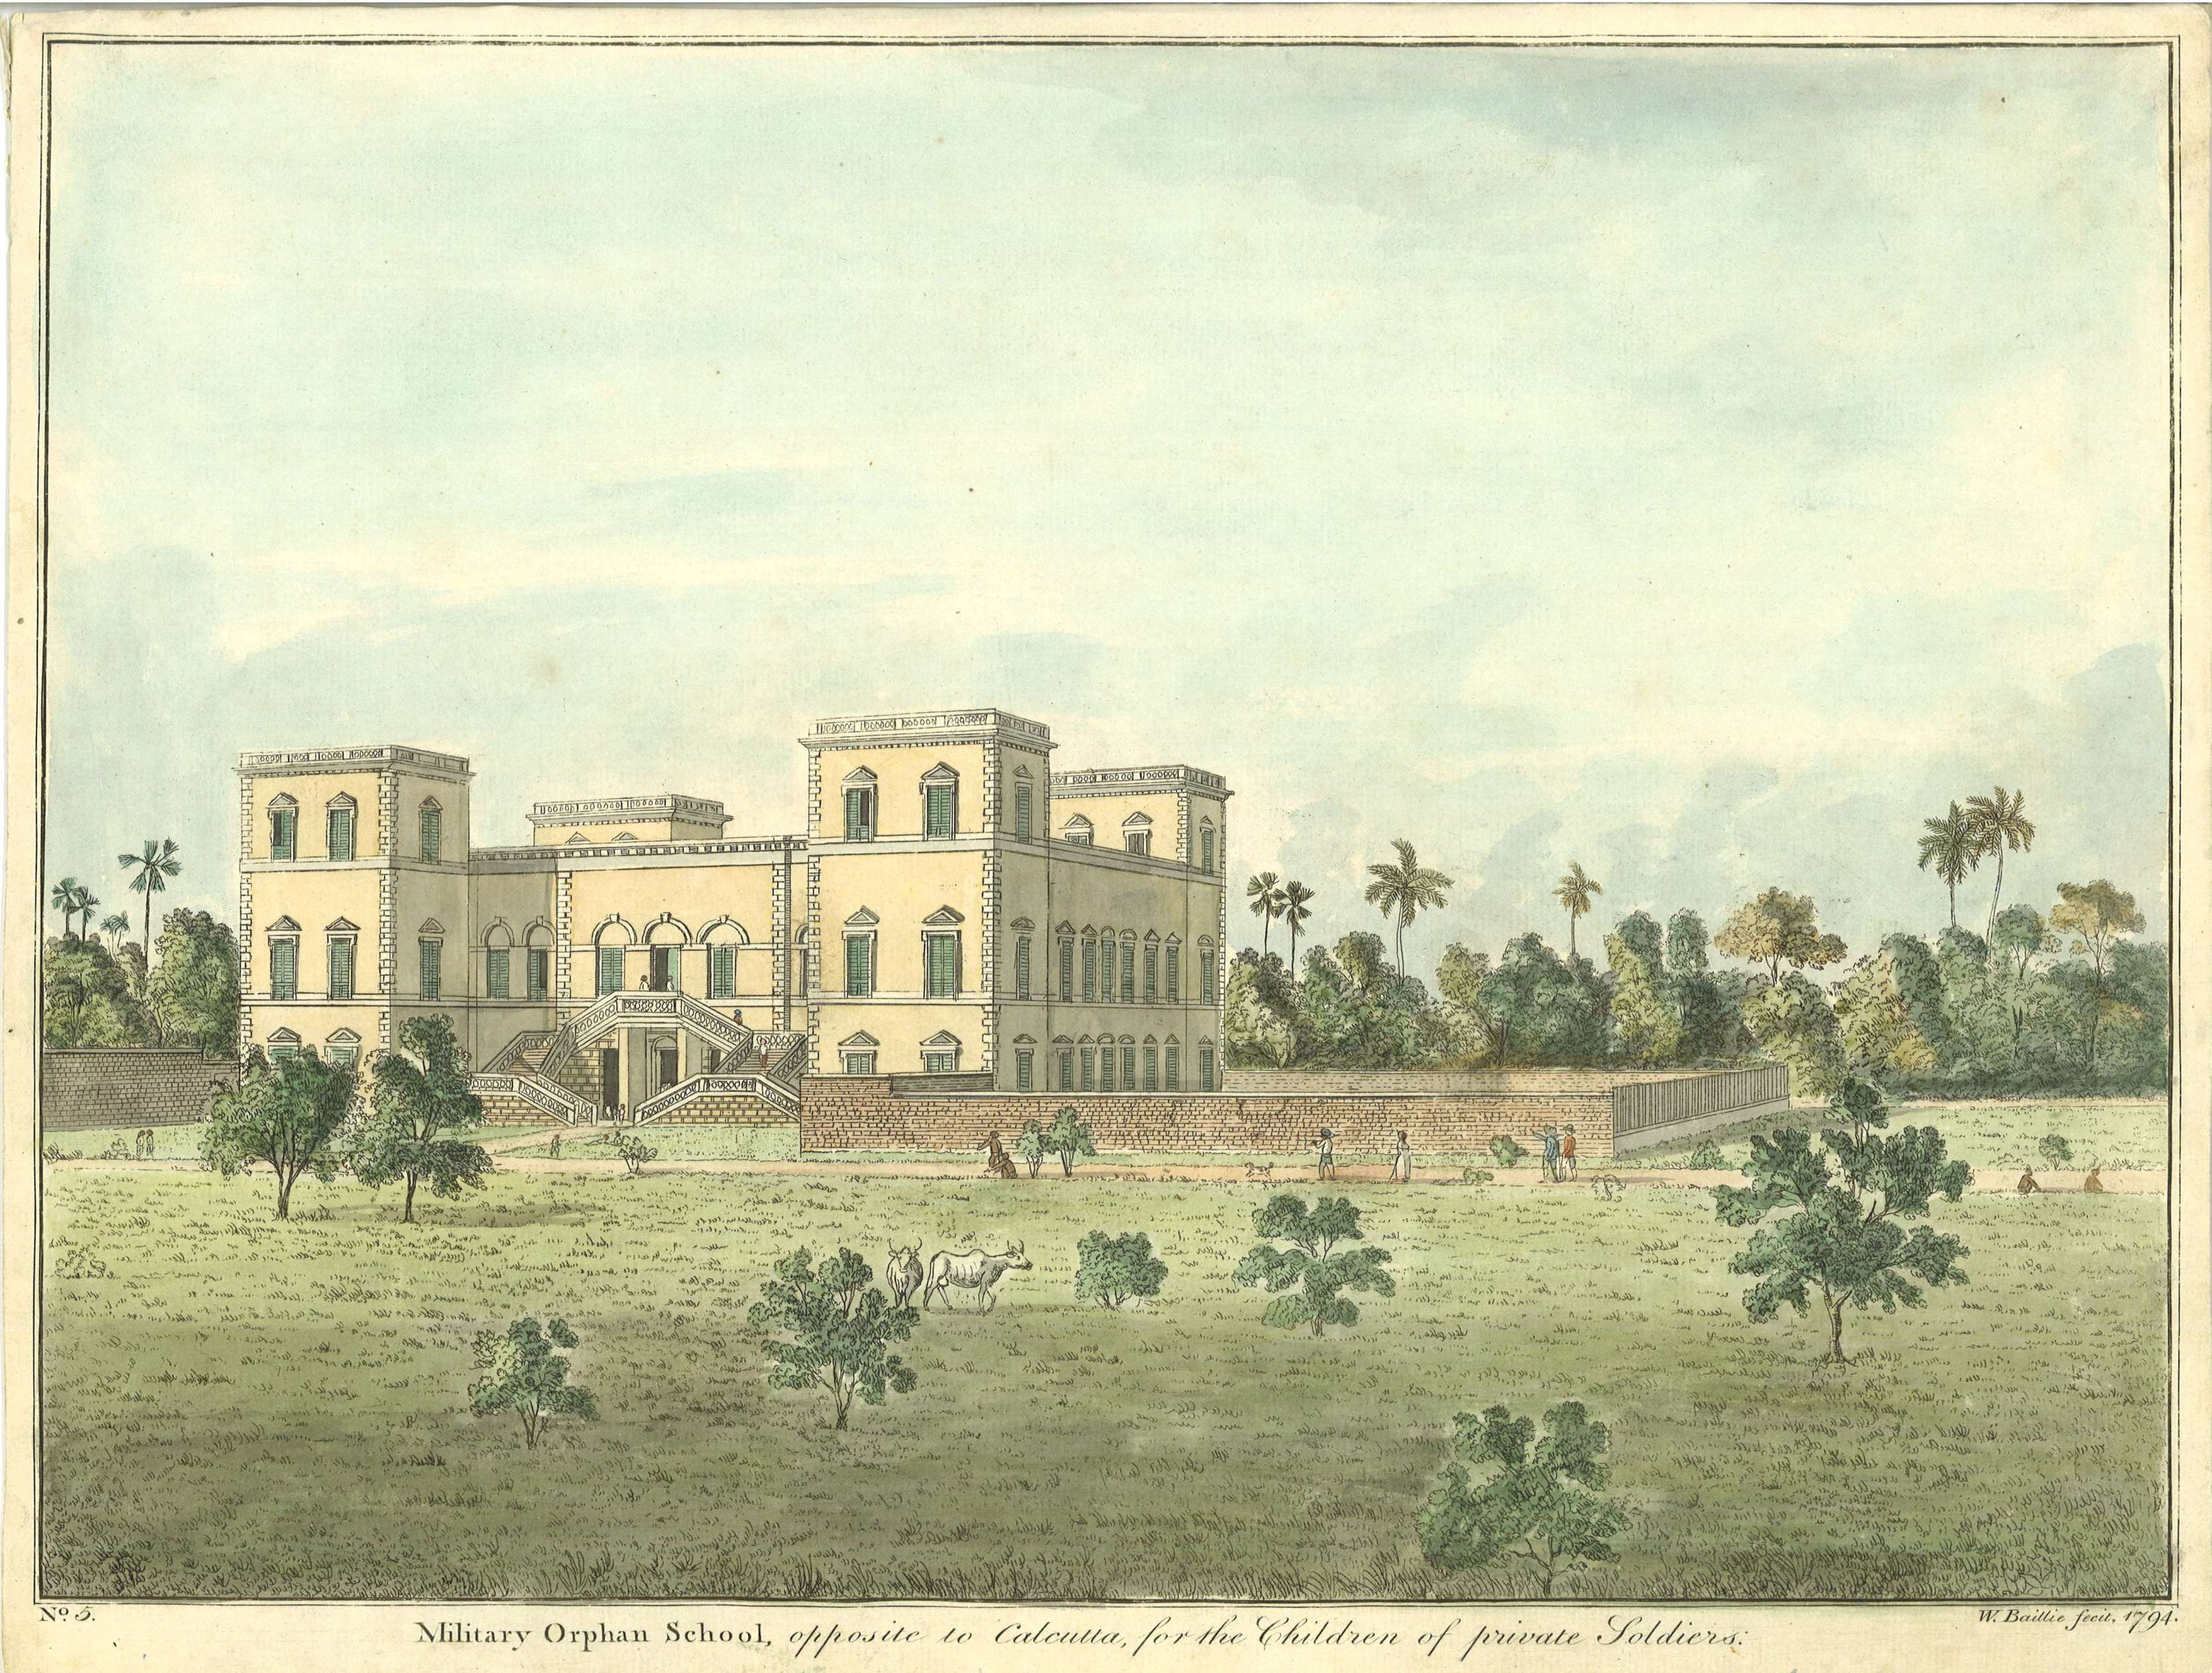 Military Orphan School, opposite to Calcutta, for the children of private soldiers / W. Baillie